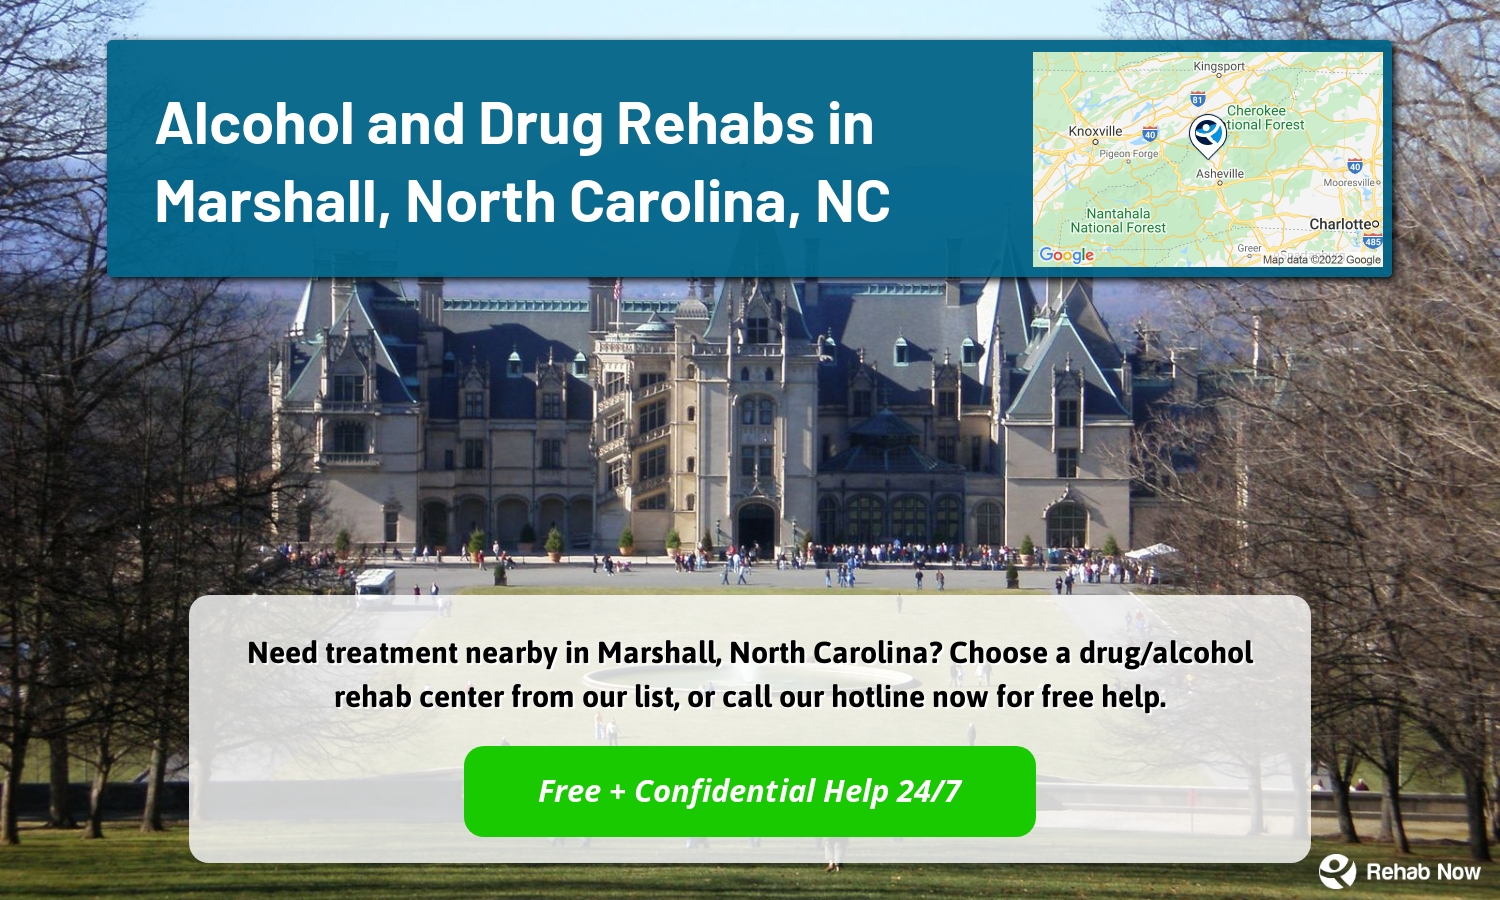 Need treatment nearby in Marshall, North Carolina? Choose a drug/alcohol rehab center from our list, or call our hotline now for free help.